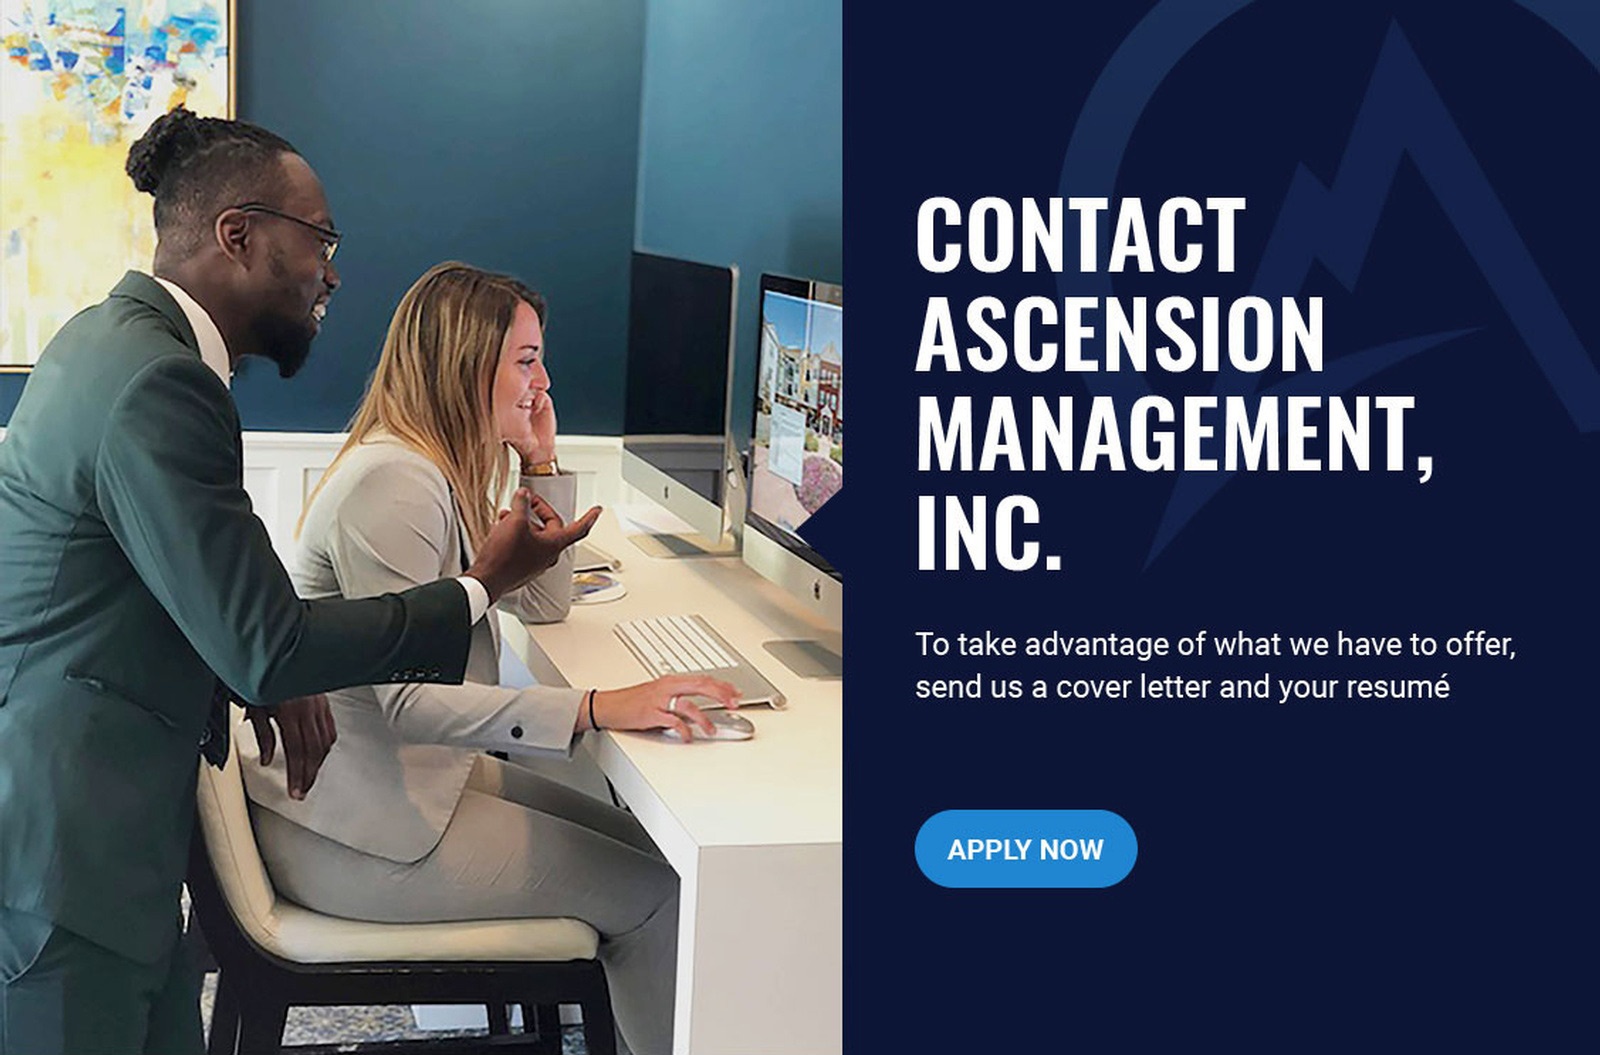 Contact Ascension Management, Inc - Direct Marketing and Sales Firm New York City